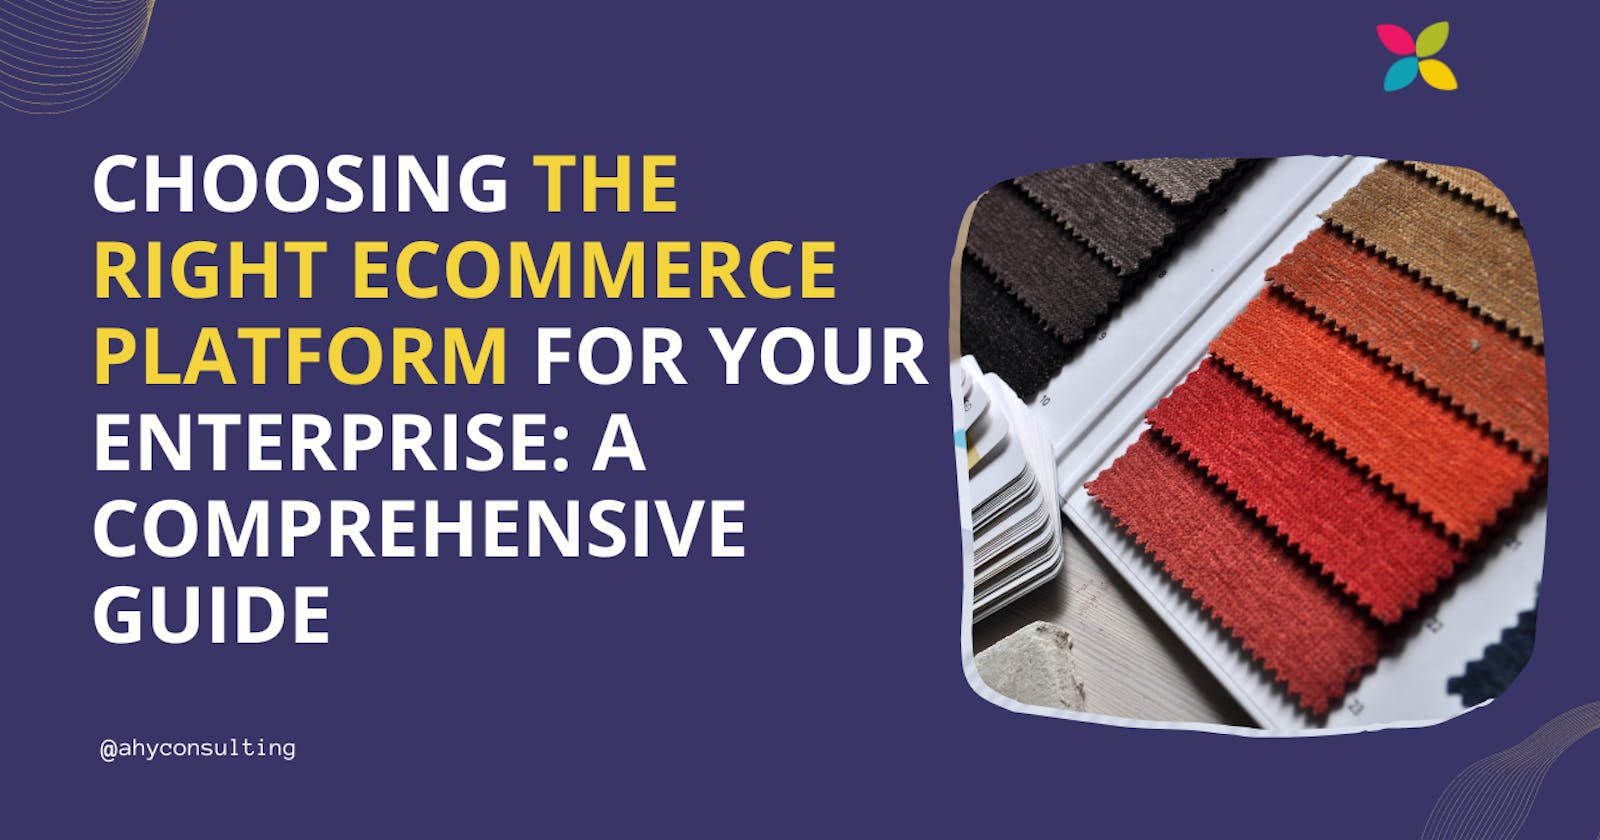 Choosing the Right eCommerce Platform for Your Enterprise: A Comprehensive Guide